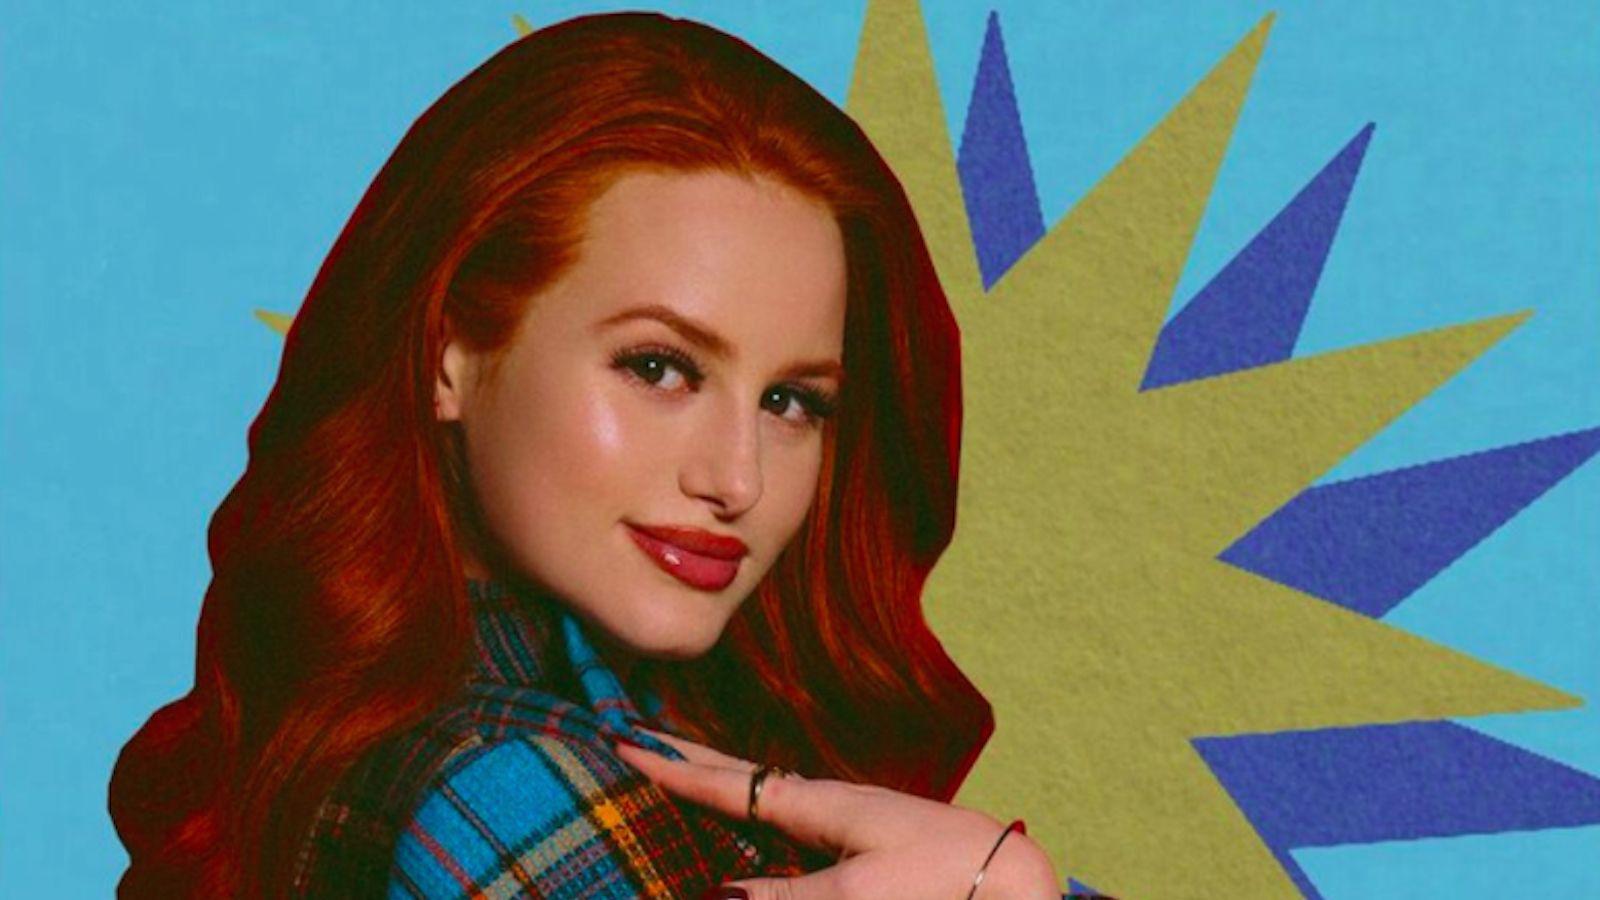 Madelaine Petsch Galore Cover: Meet This Generation's Go To TV Bad Girl